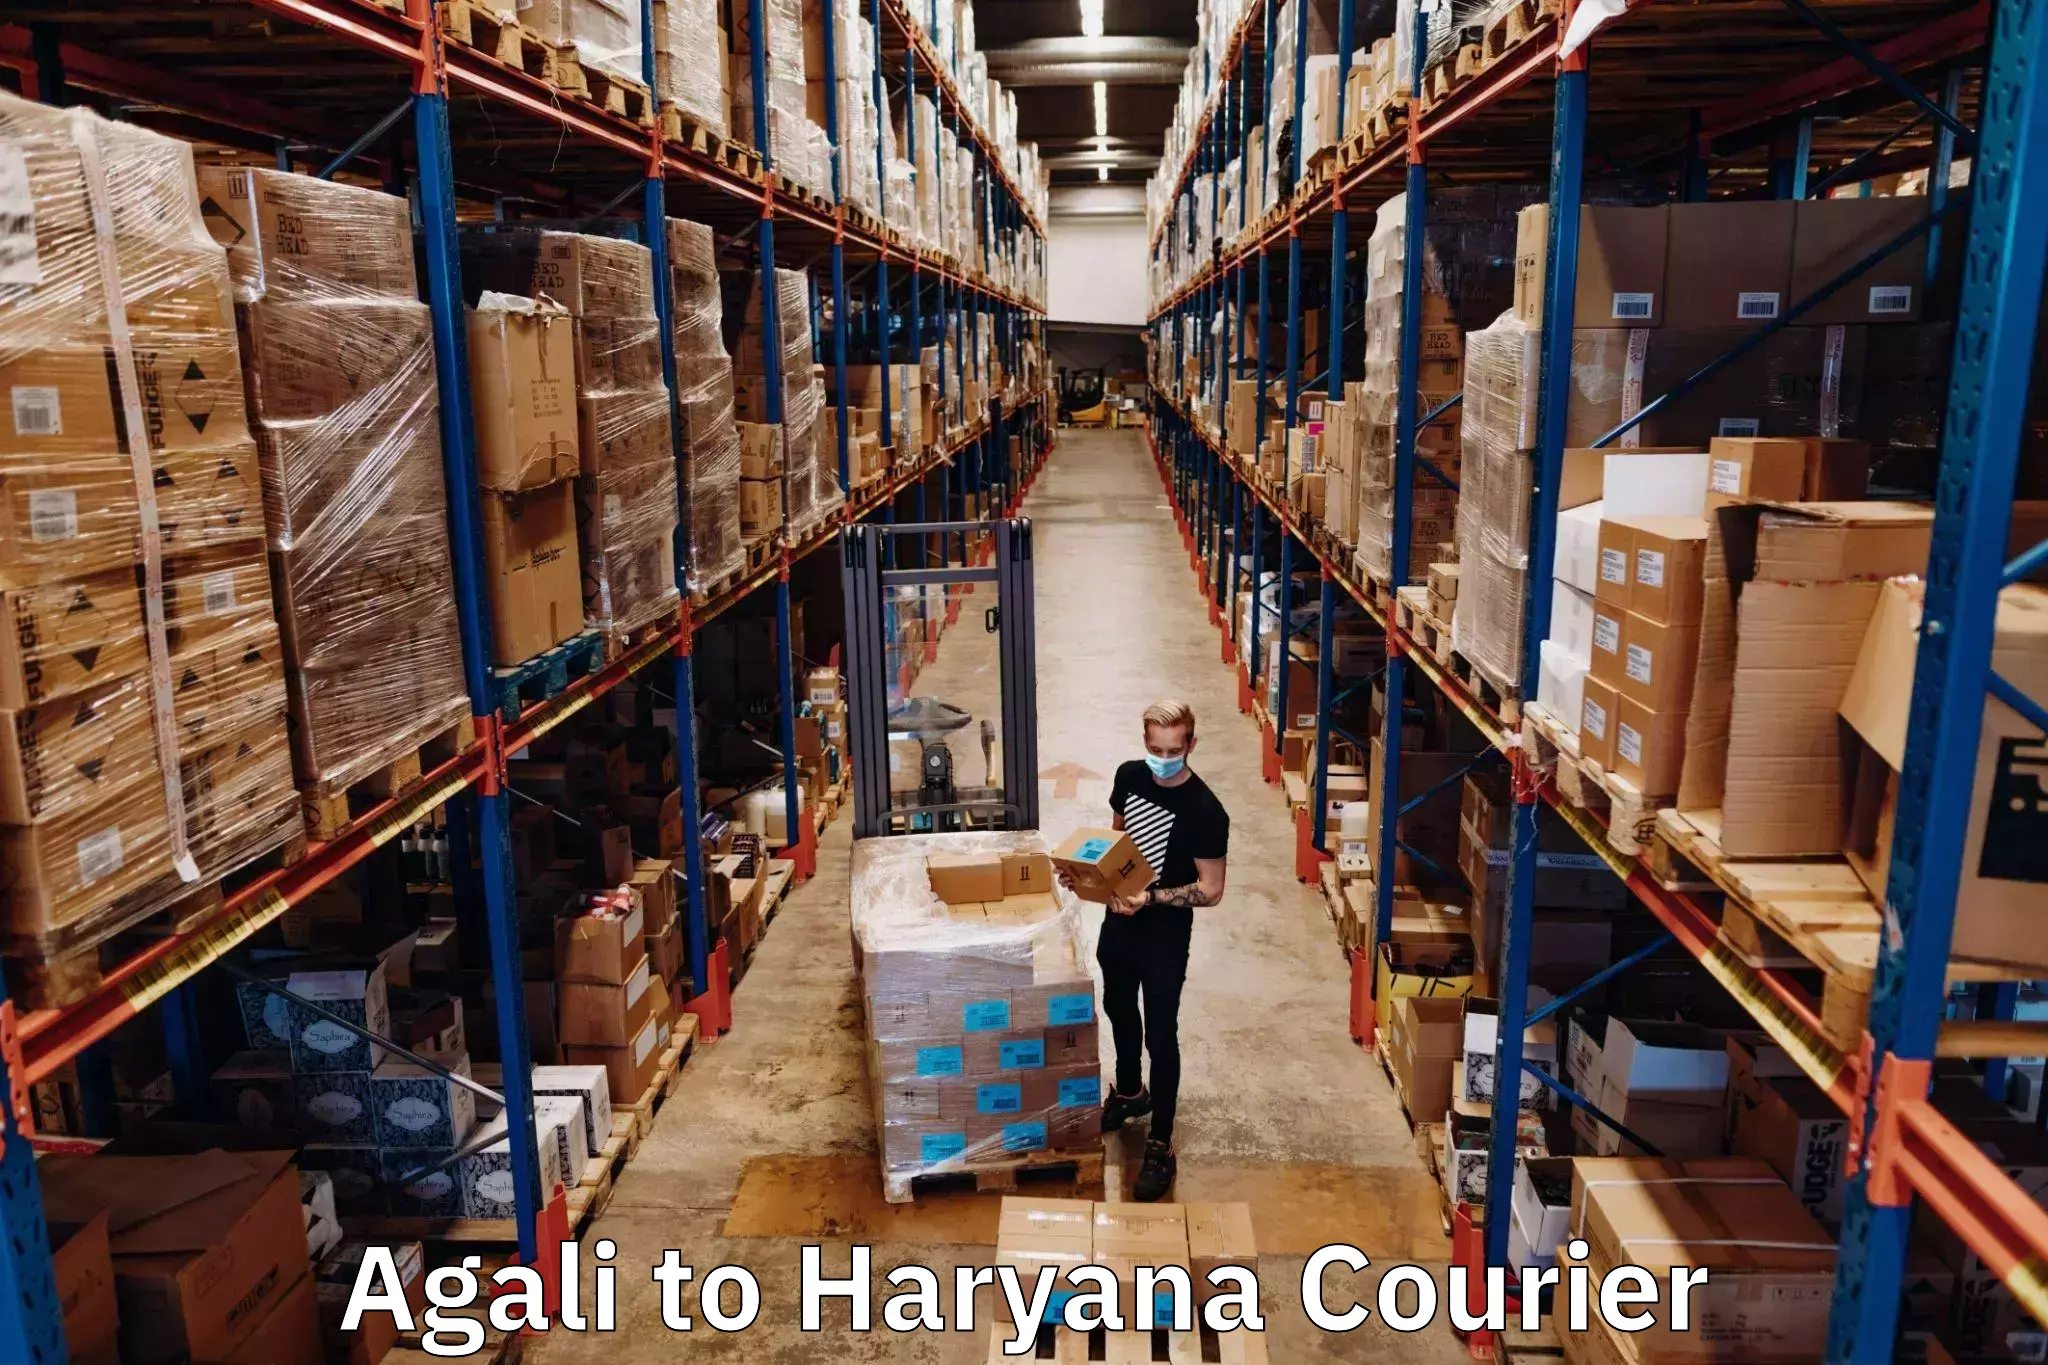 Reliable courier service Agali to Chaudhary Charan Singh Haryana Agricultural University Hisar